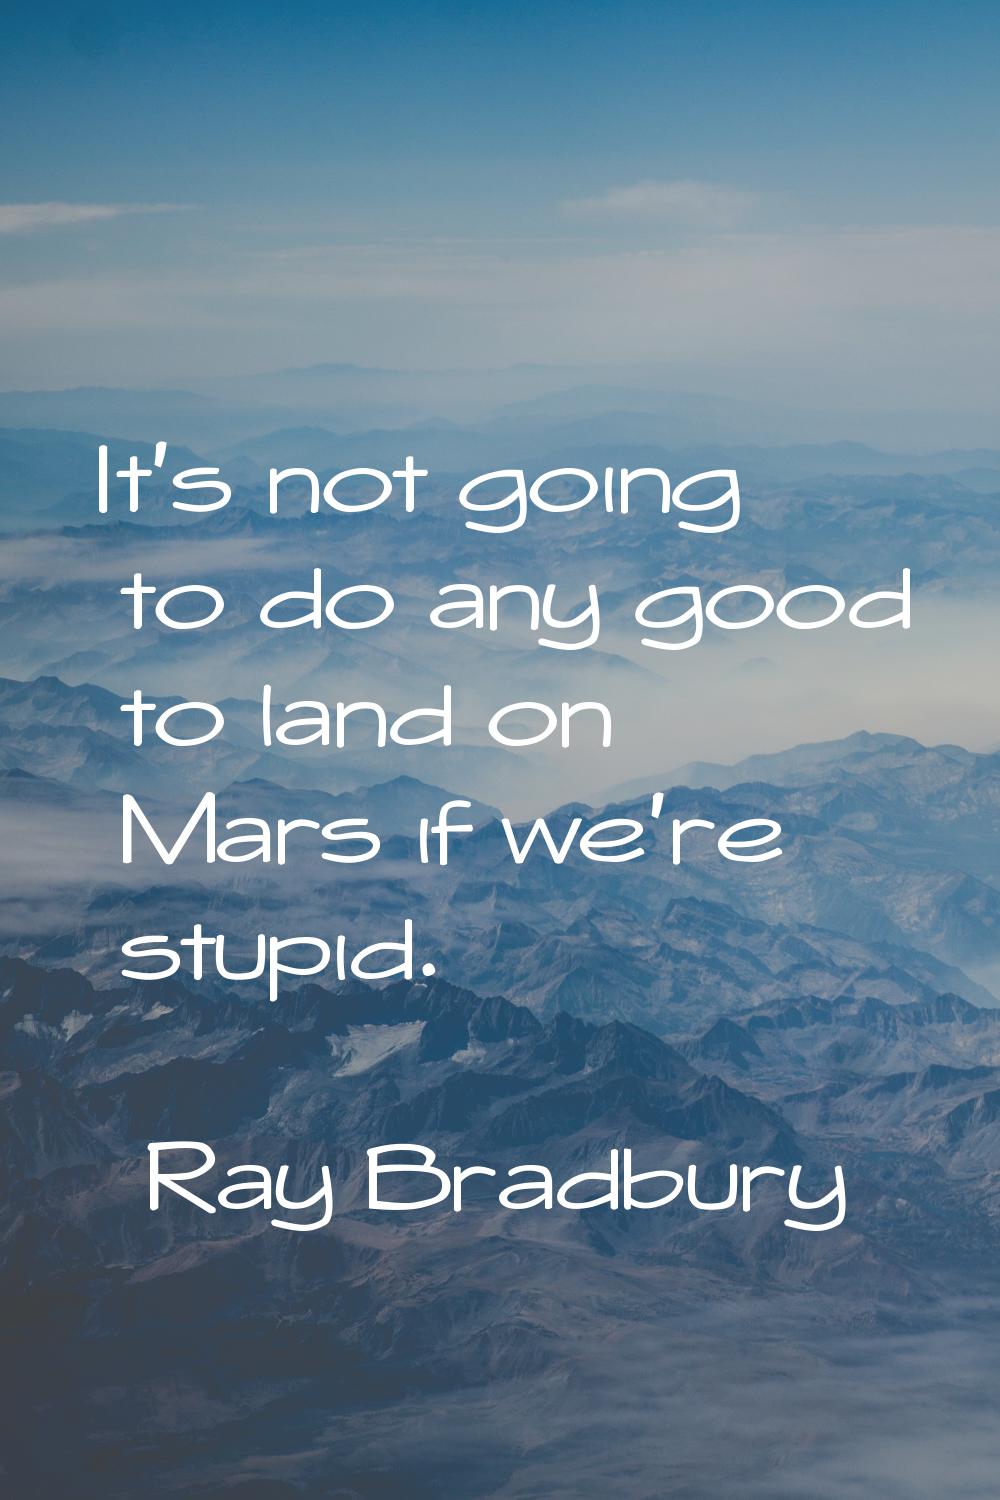 It's not going to do any good to land on Mars if we're stupid.